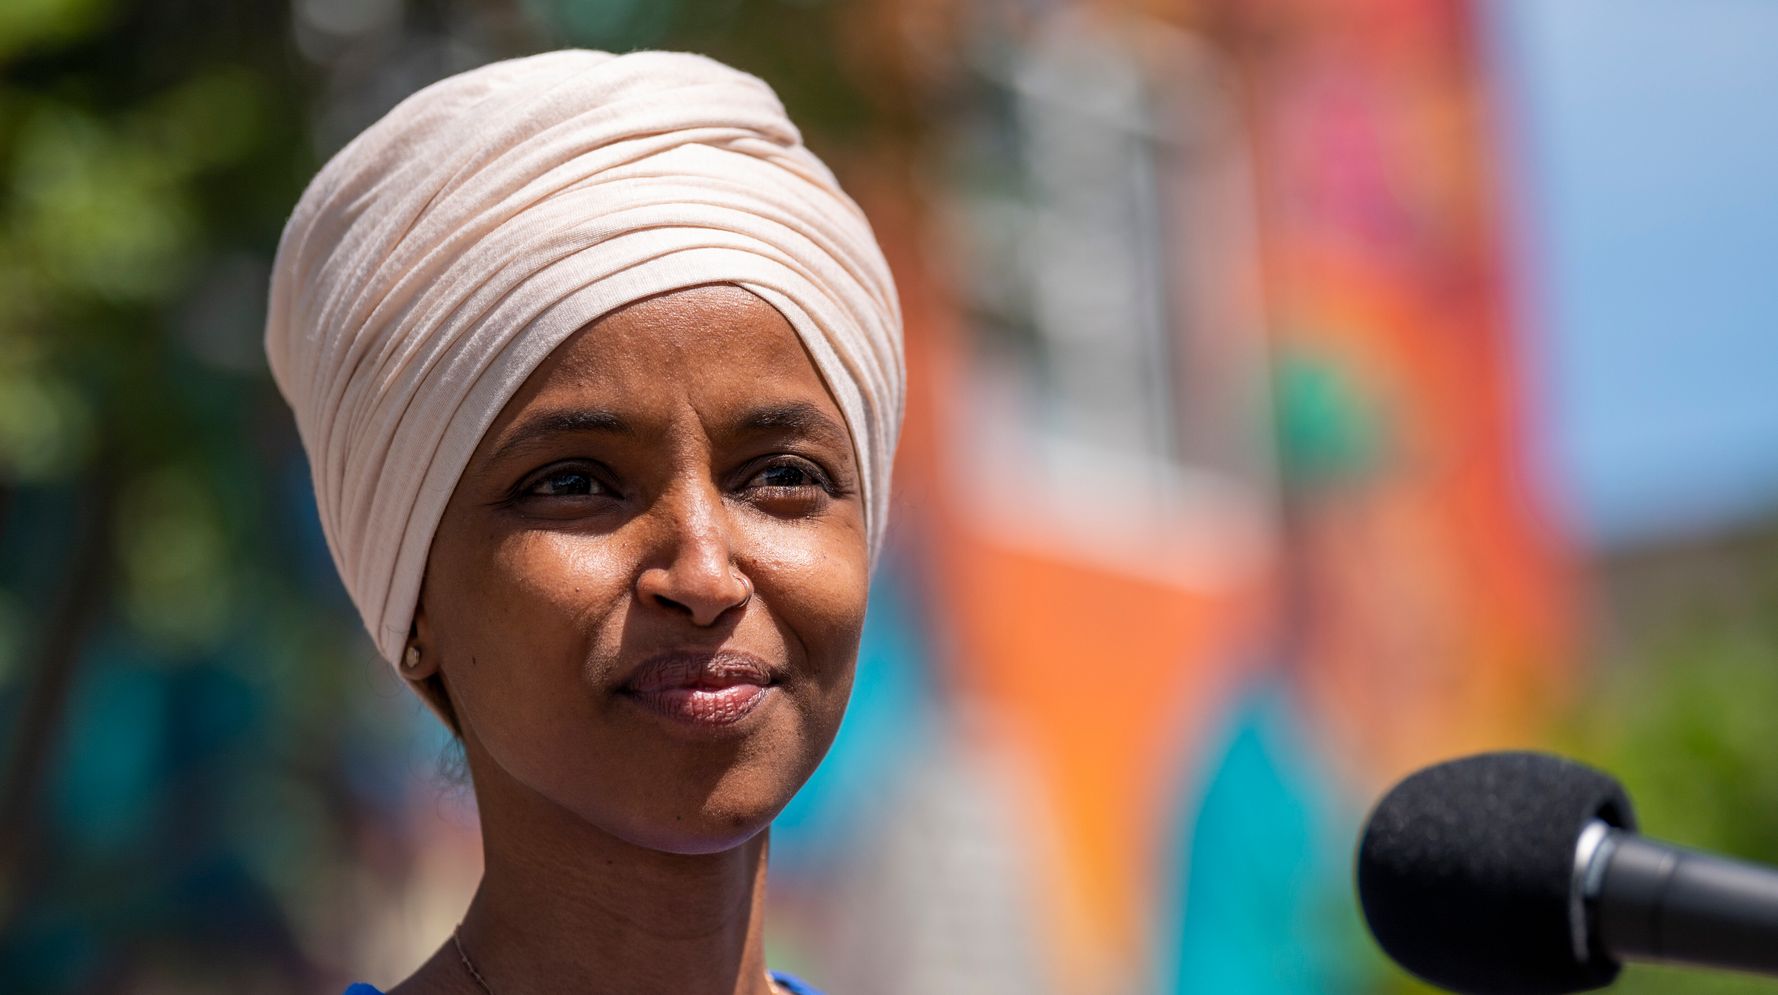 Ilhan Omar’s New Guaranteed Income Bill Would Send $1,200 Monthly To Most Americans